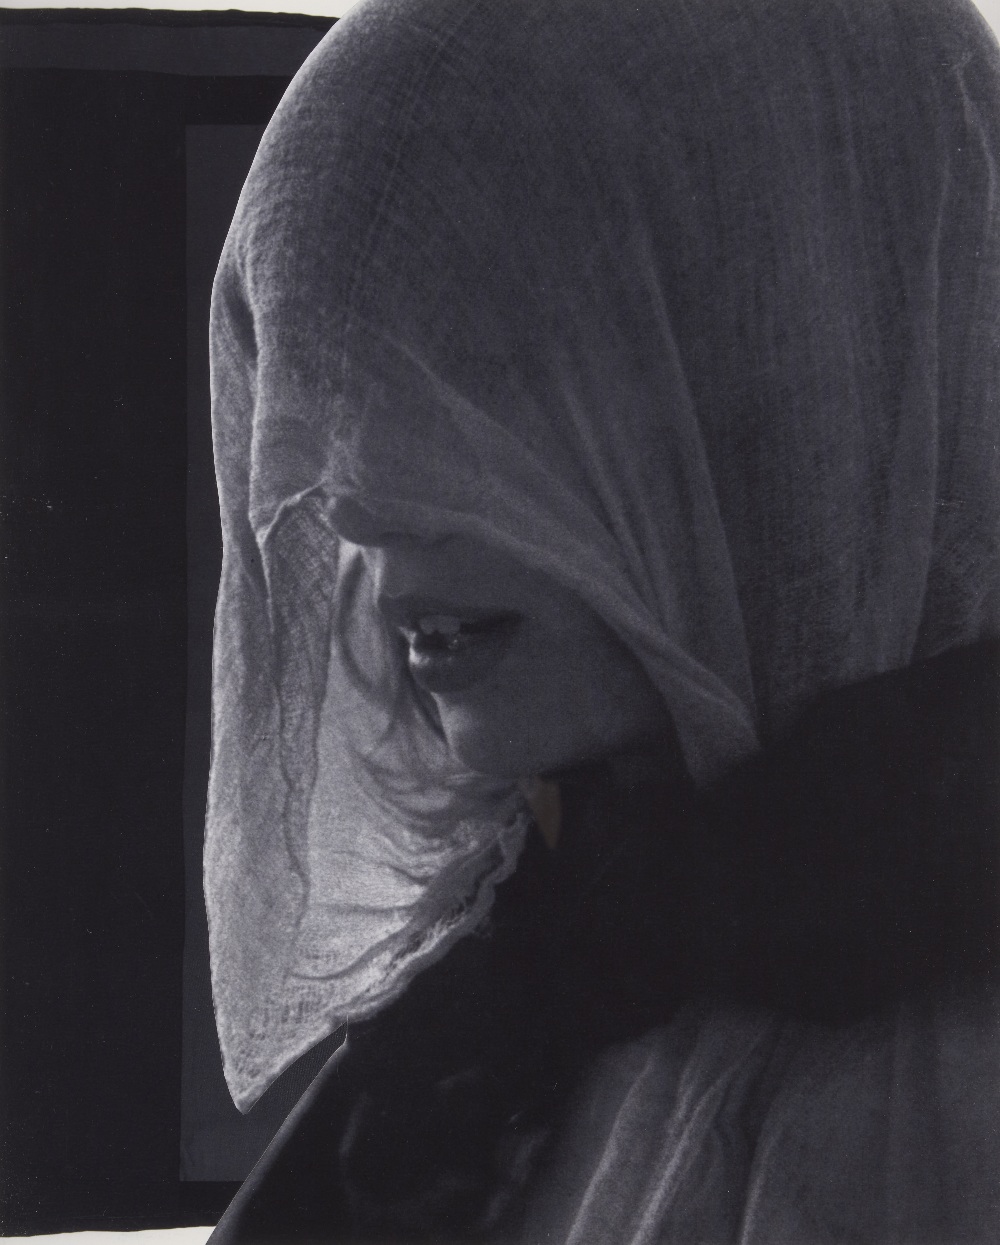 David Noonan, Australia b.1969 - Woman in a veil, 2009; gelatin silver print, signed and dated on